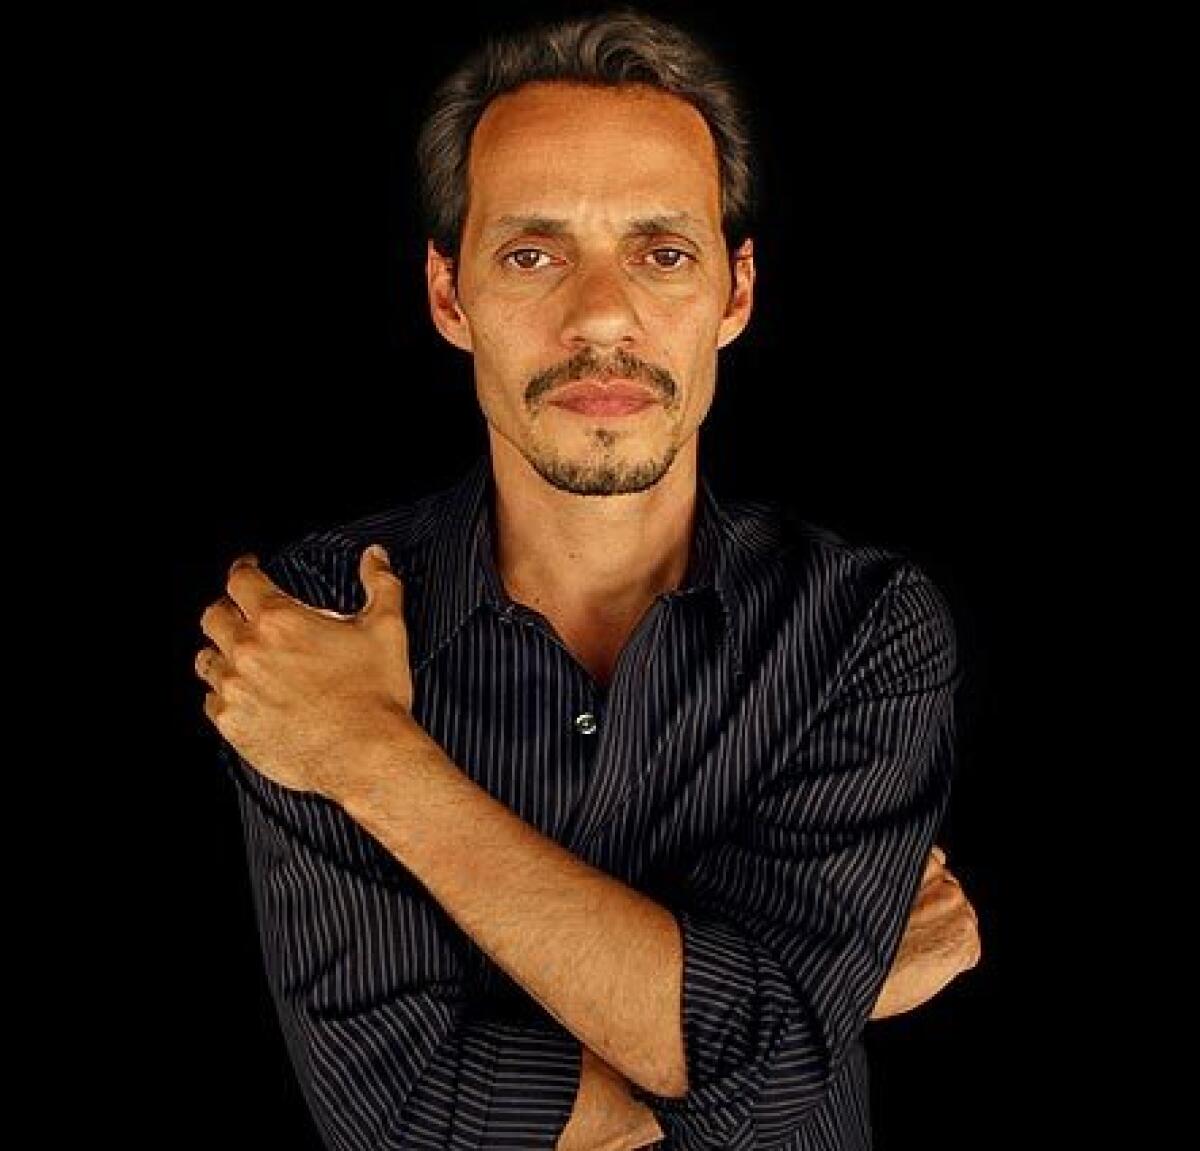 Singer and actor Marc Anthony reprises his role as Detective Nick Renata on the third season of the TNT drama "Hawthorne."